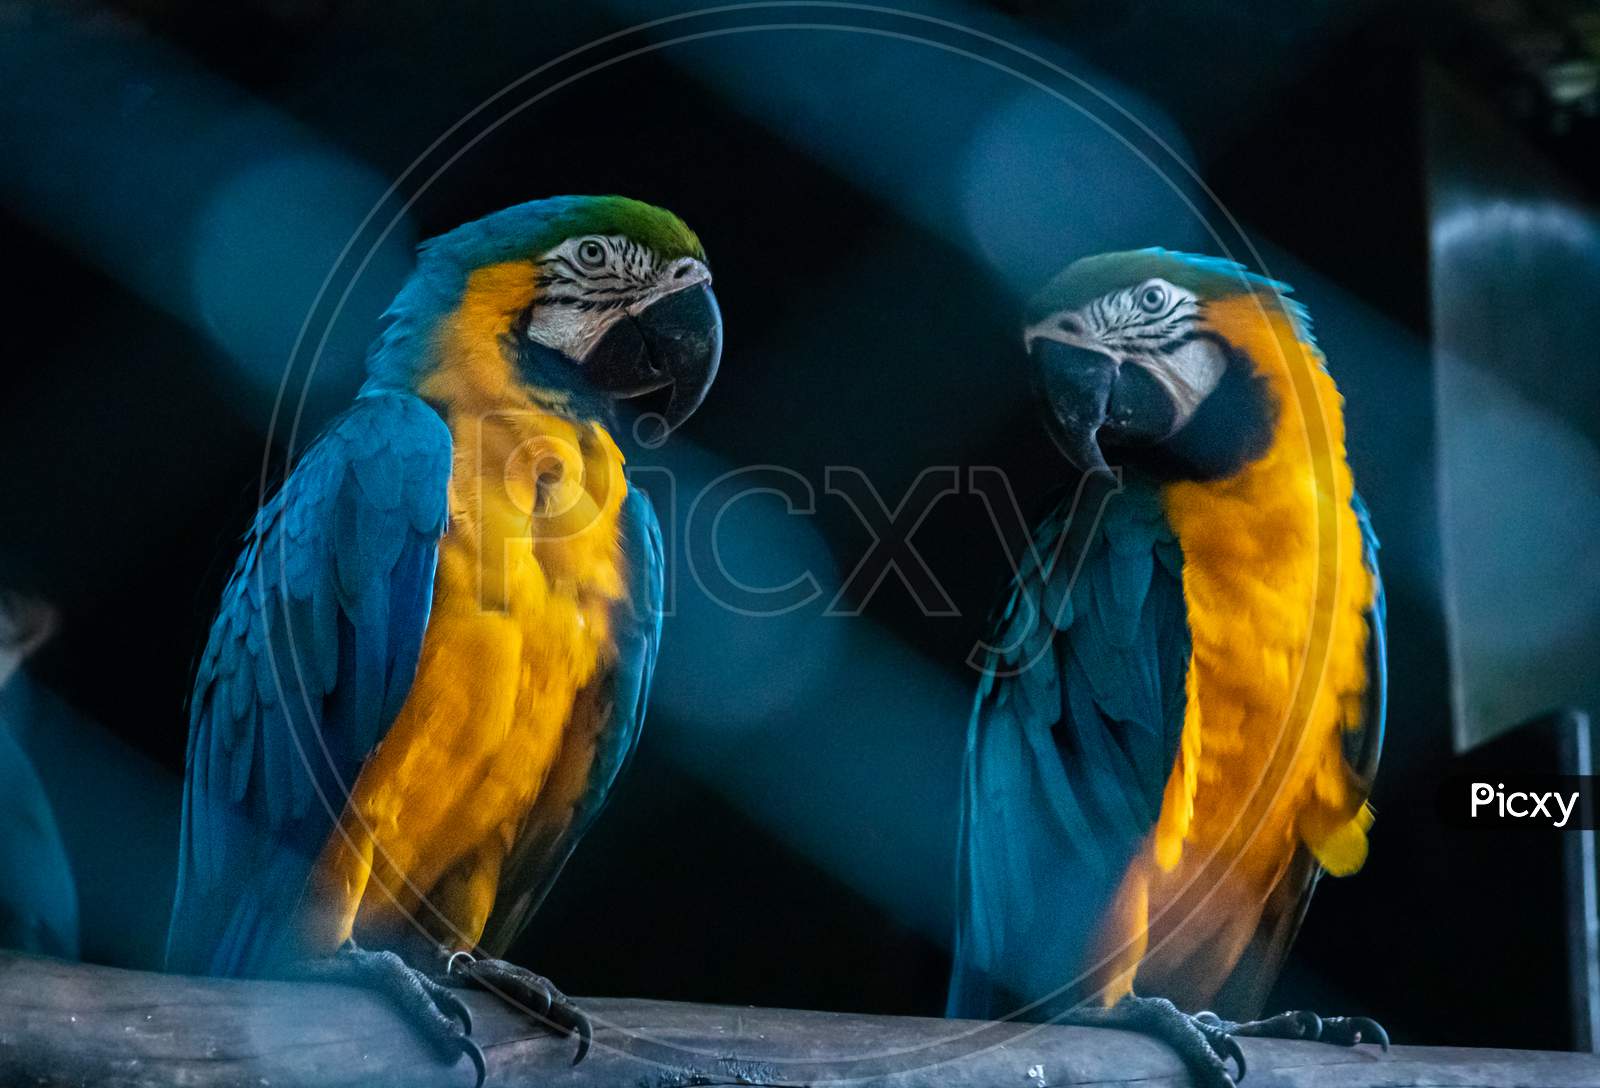 Blue Throated Macaw Pair Looking At Each Other In Dark Bird Cageblue Throated Macaw Pair Looking At Each Other In A Dark Birdcage